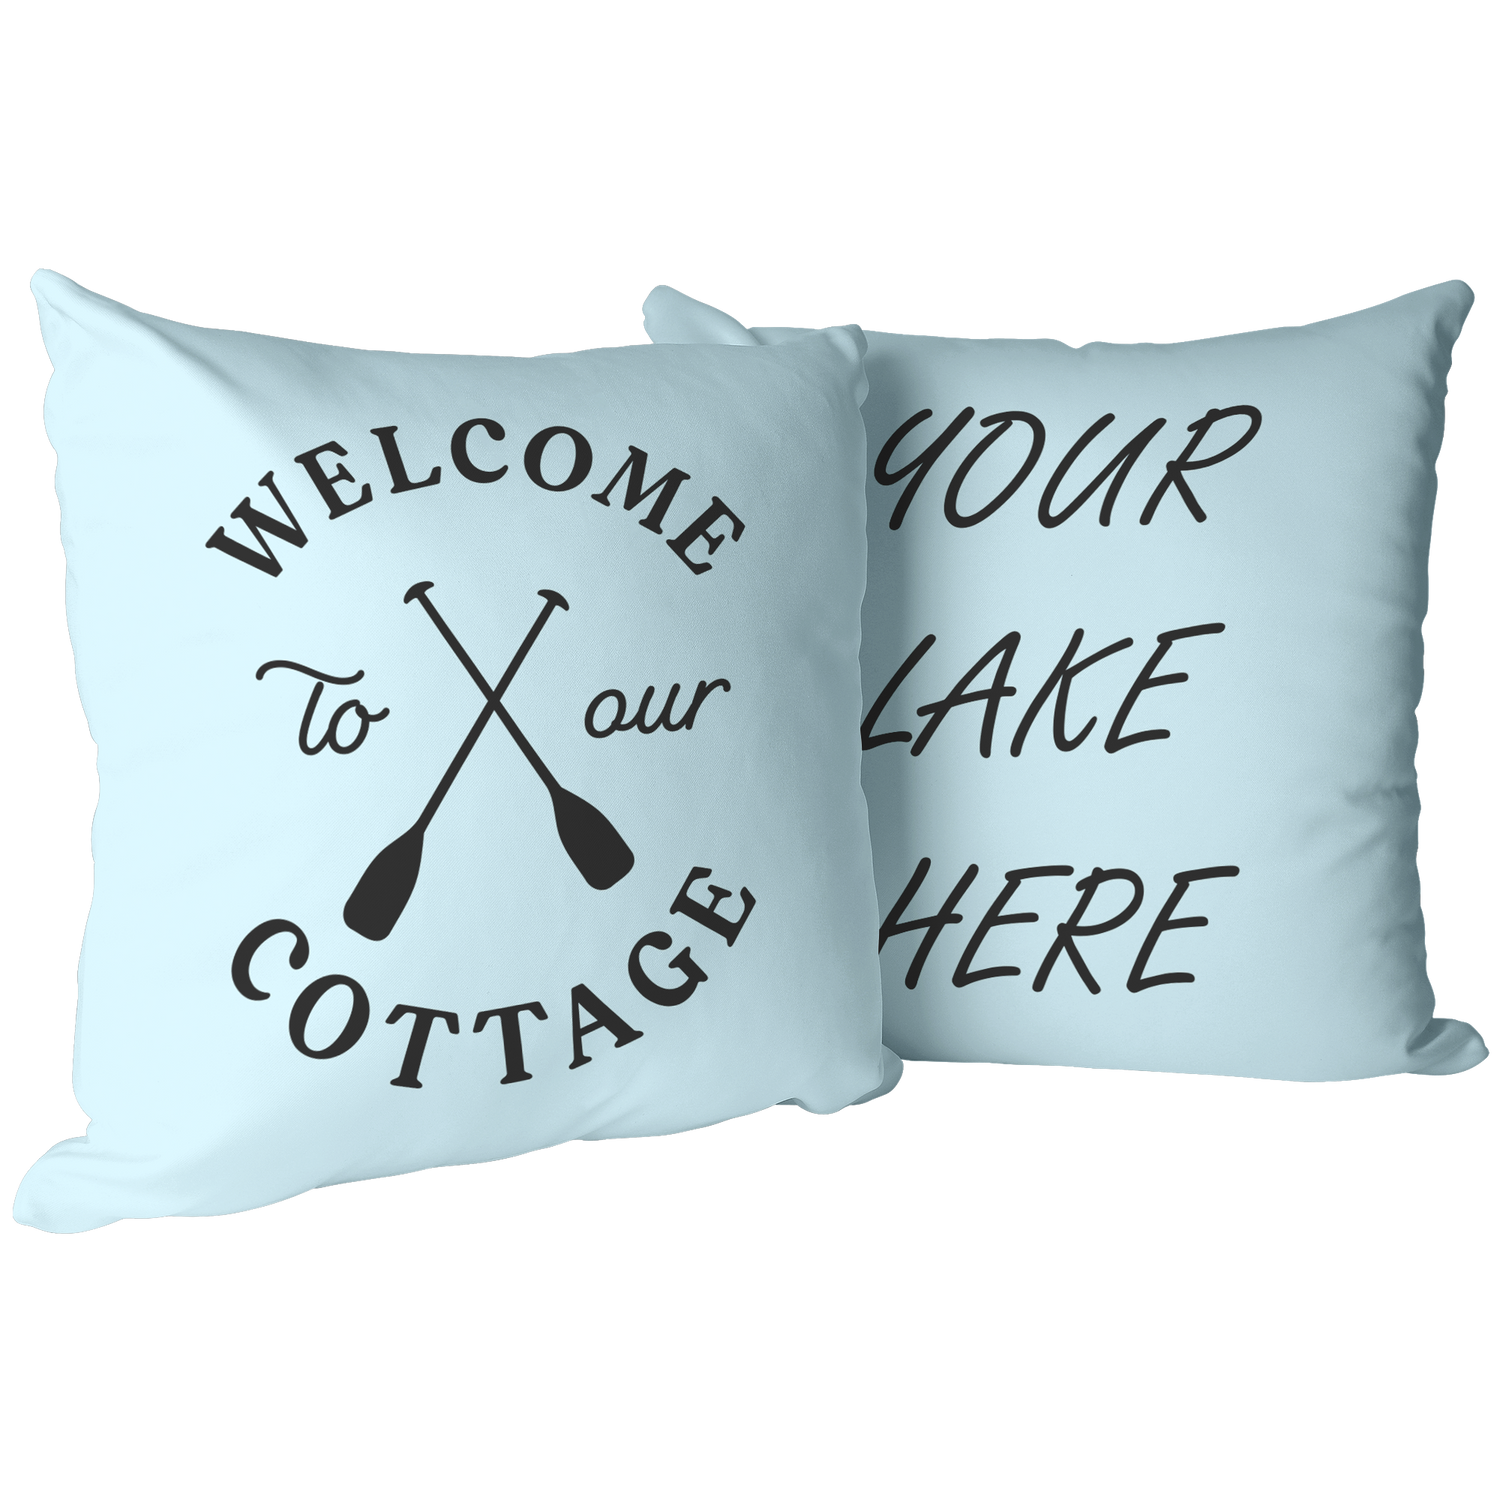 custom lake pillow. Welcome to our cottage